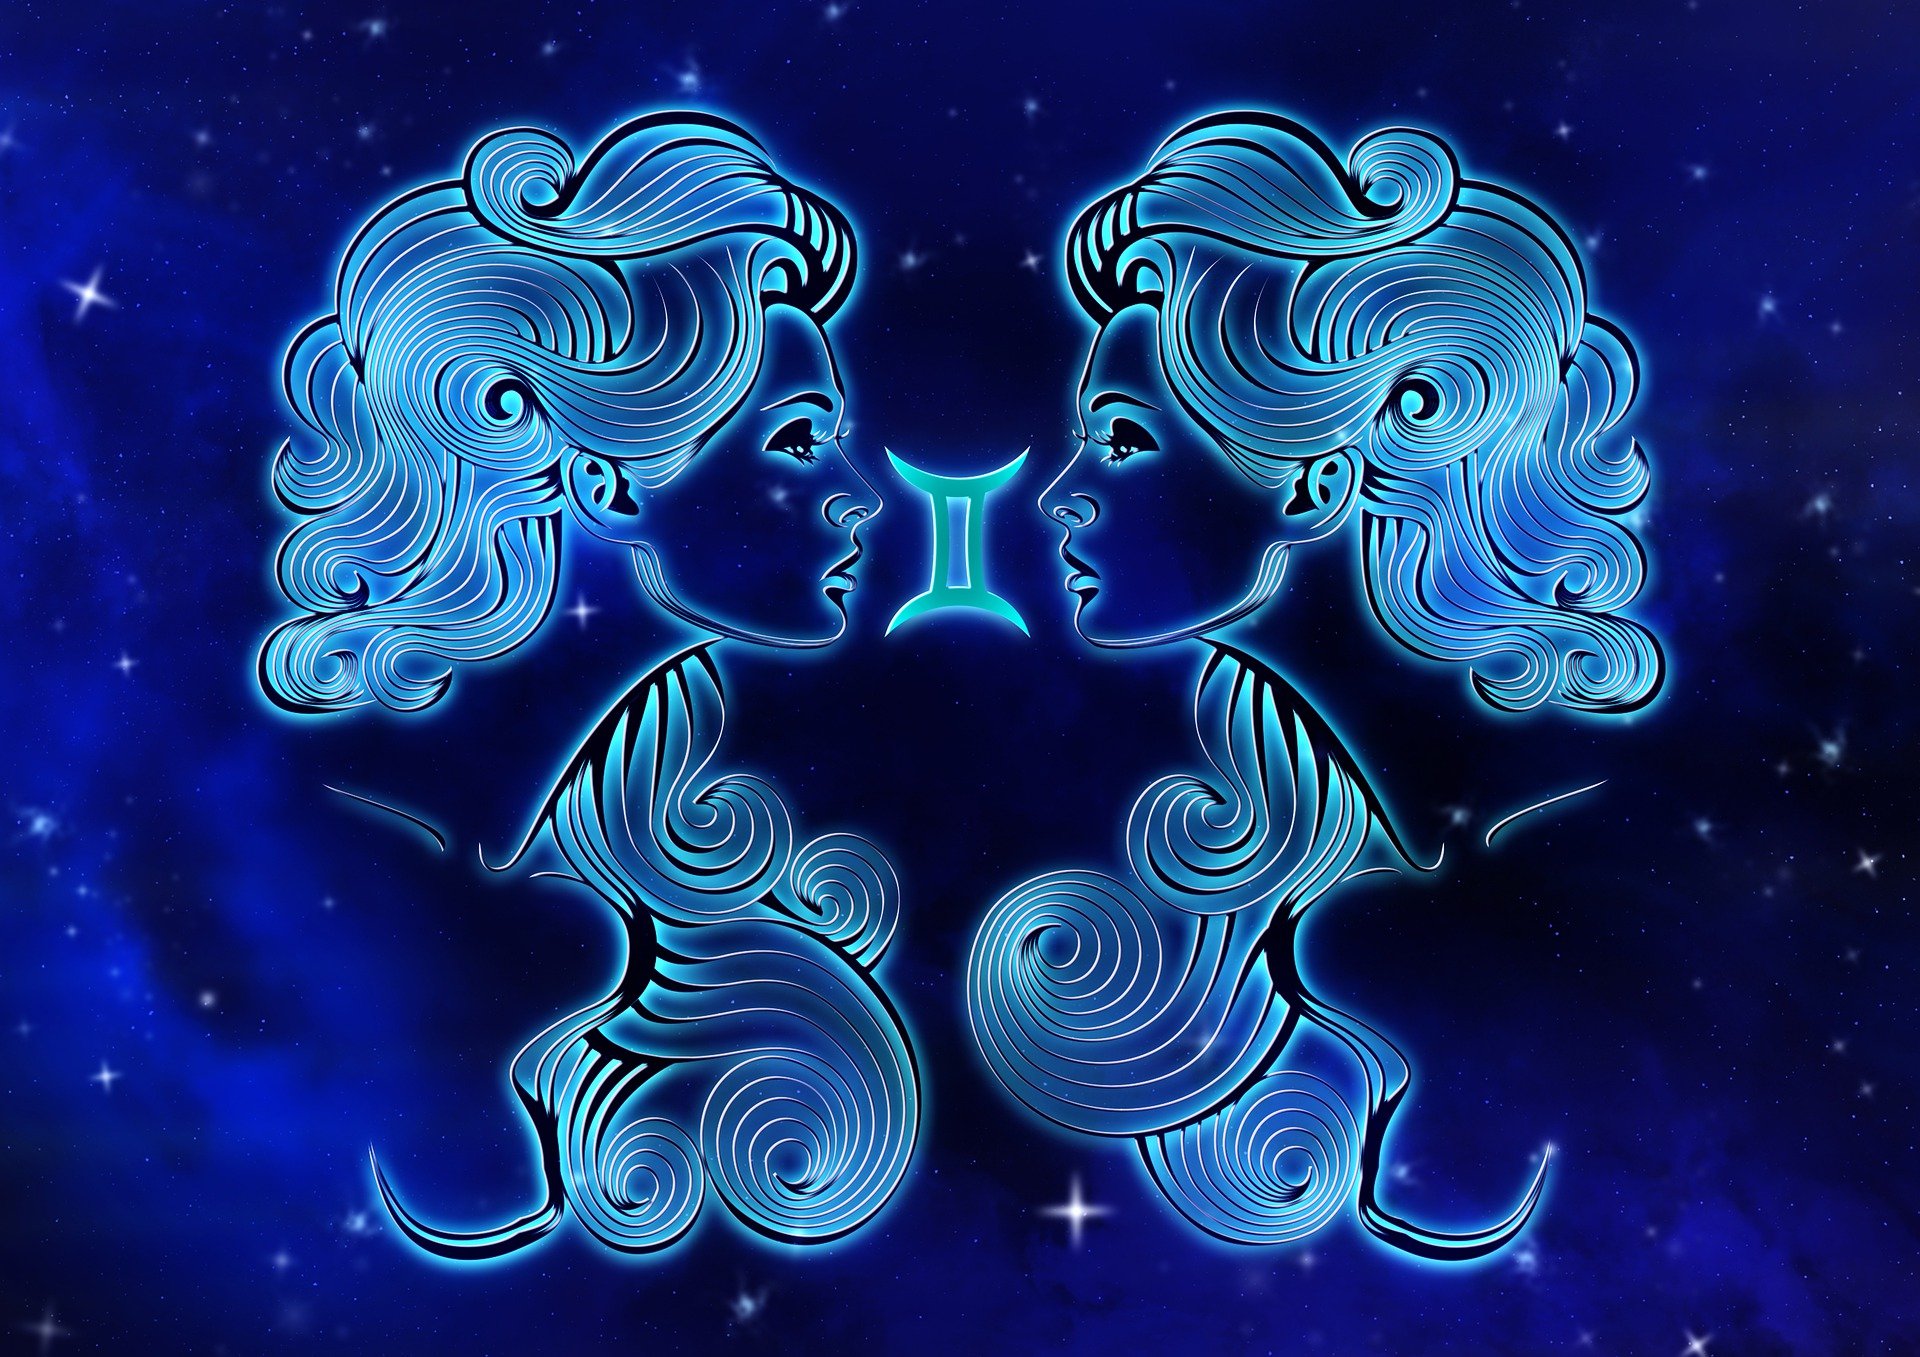 An illustration of a Gemini star sign | Source: Pixabay 